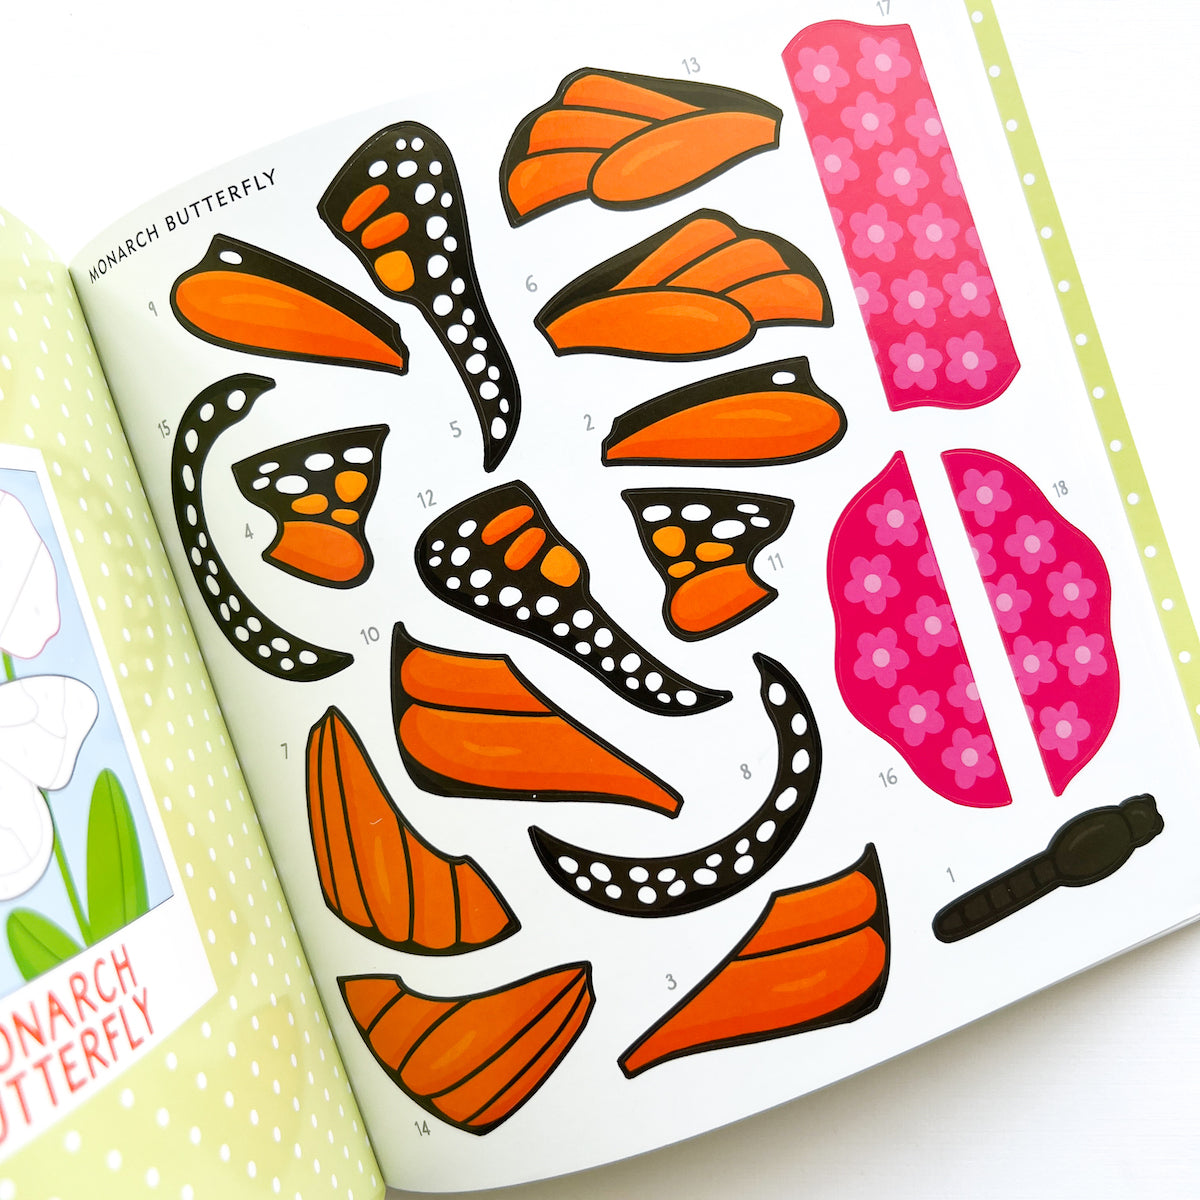 Color-by-Sticker Book - Butterflies & Bugs